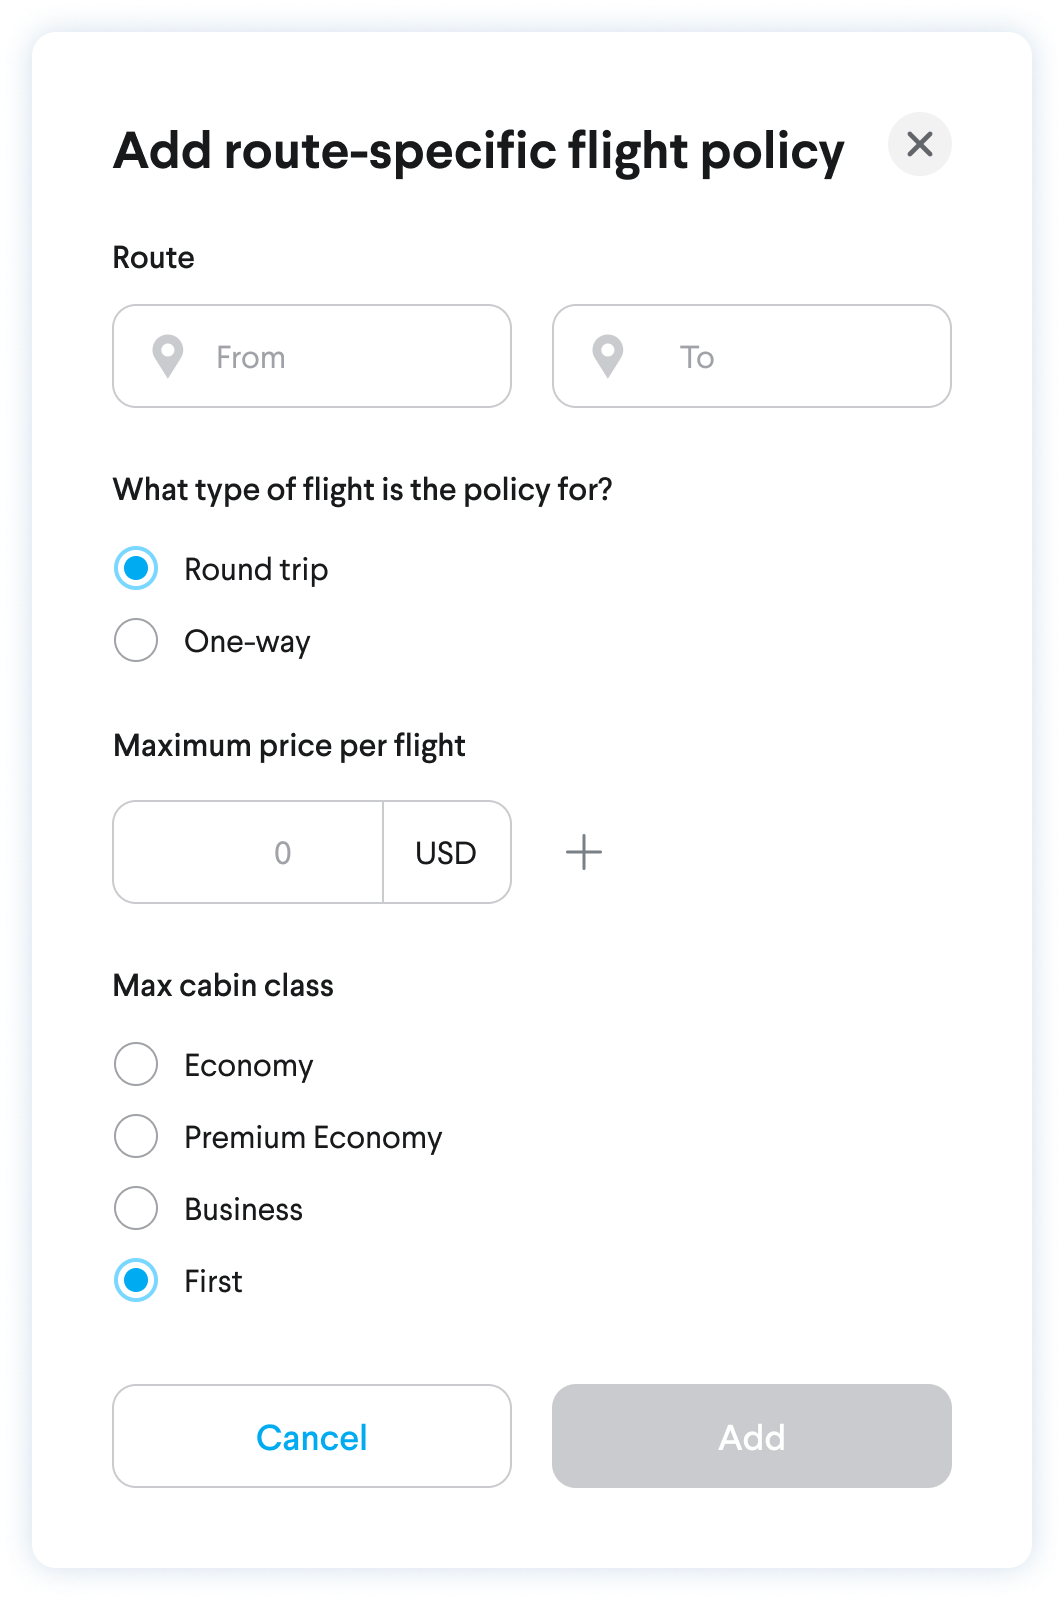 Product screenshot of route-specific flight policy modal